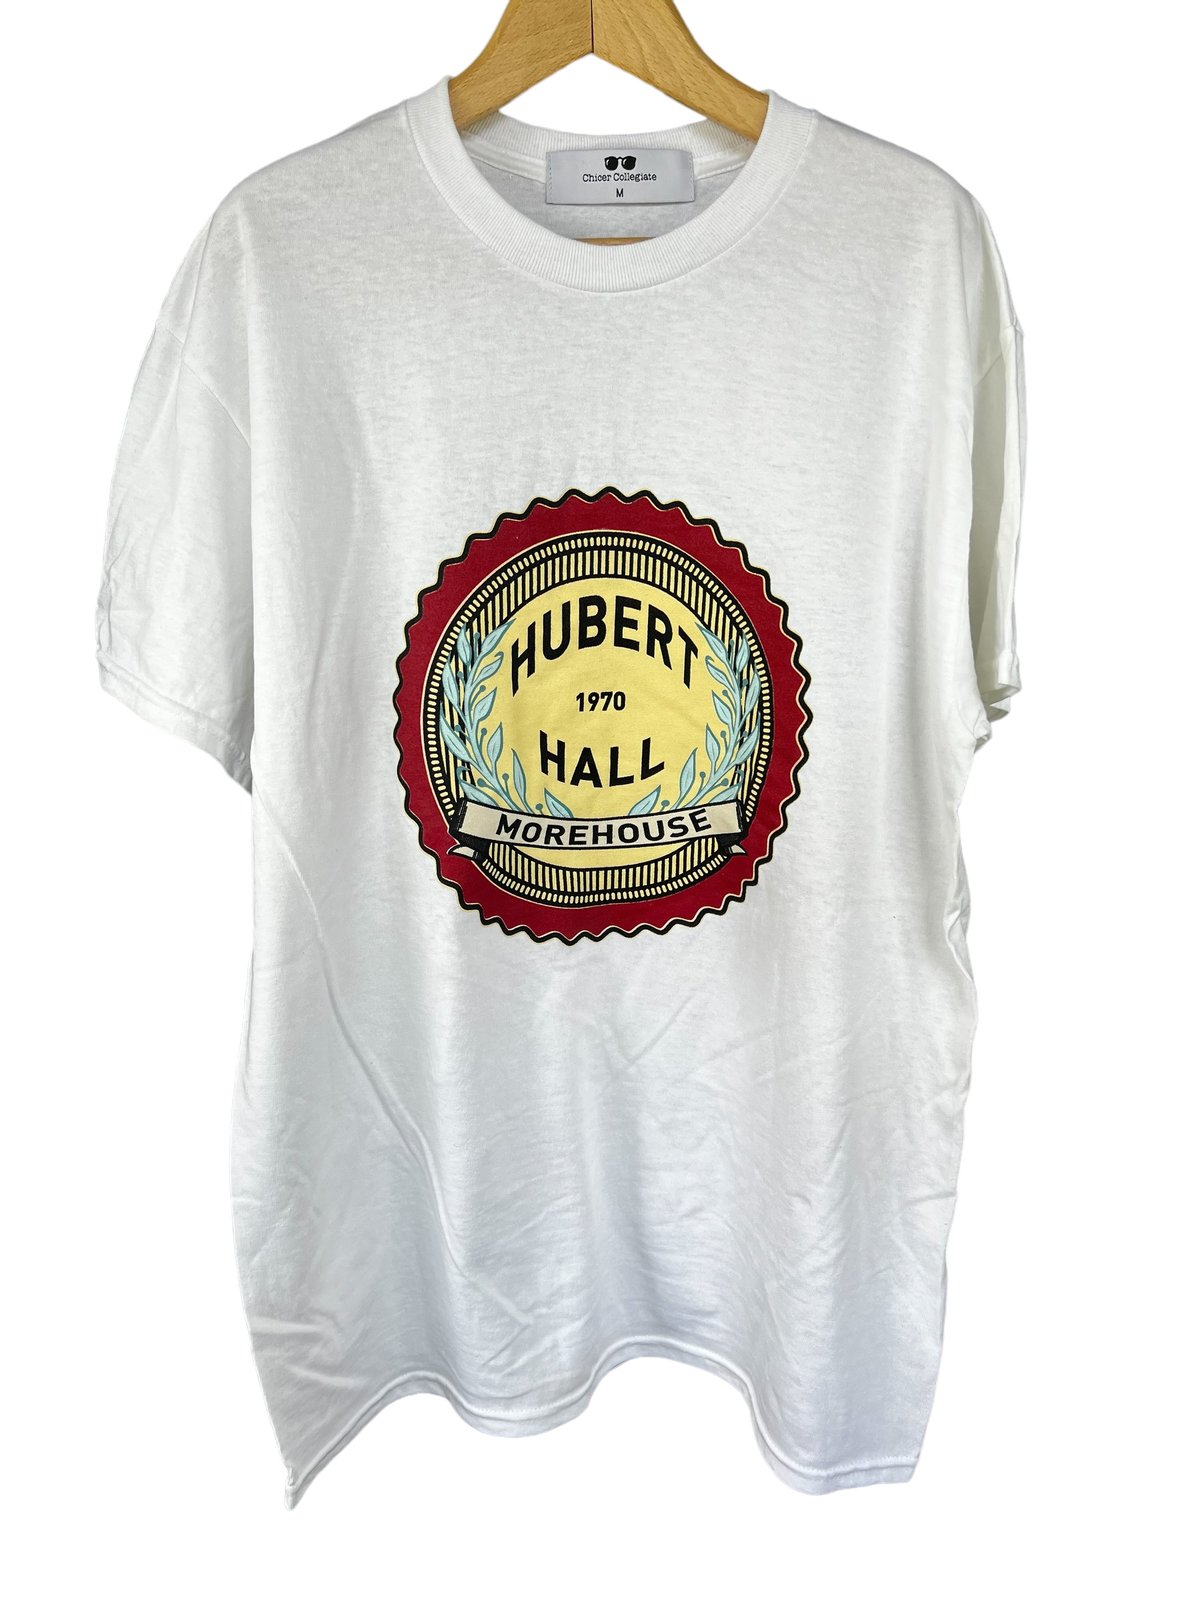 Morehouse College Tigers Heritage Tee Shirt | Tigers Tee Shirt | Morehouse  Tigers Tee | HBCU | HBCU Tee Shirt | Morehouse College Shirt